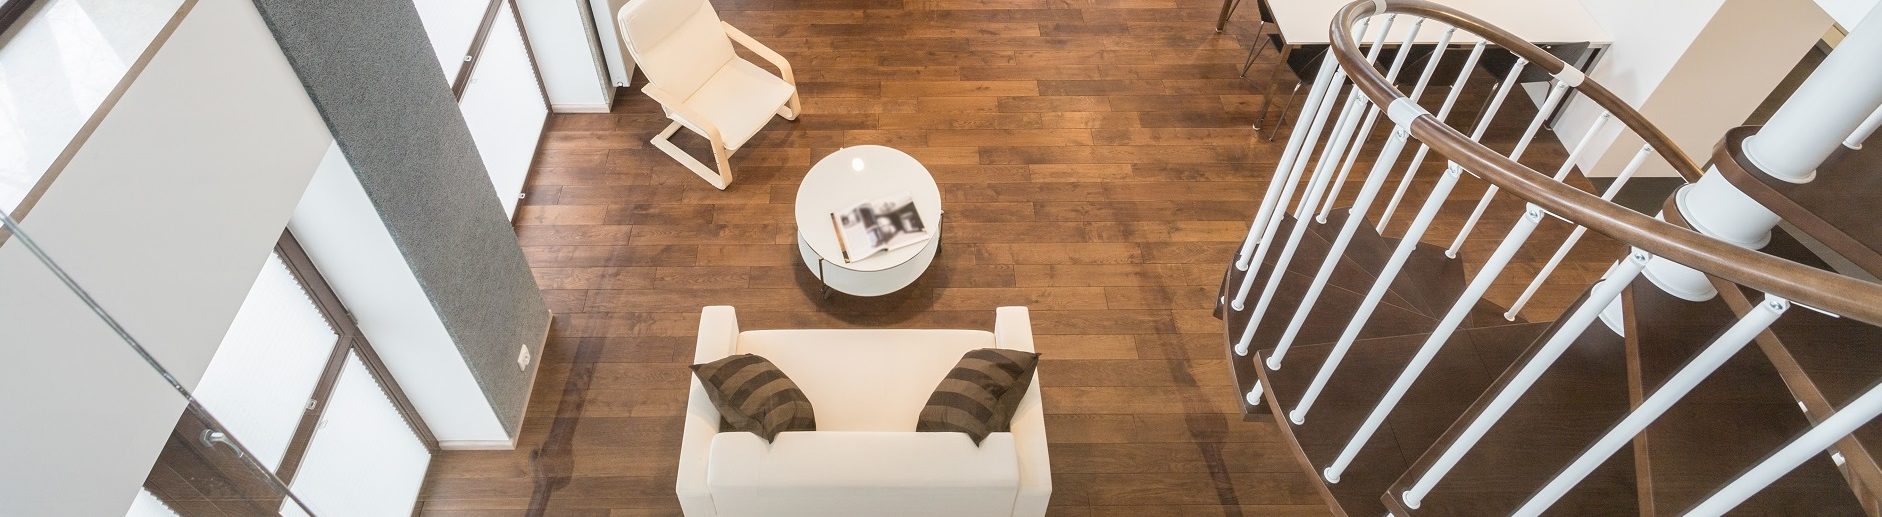 Timber Floors- What to Expect